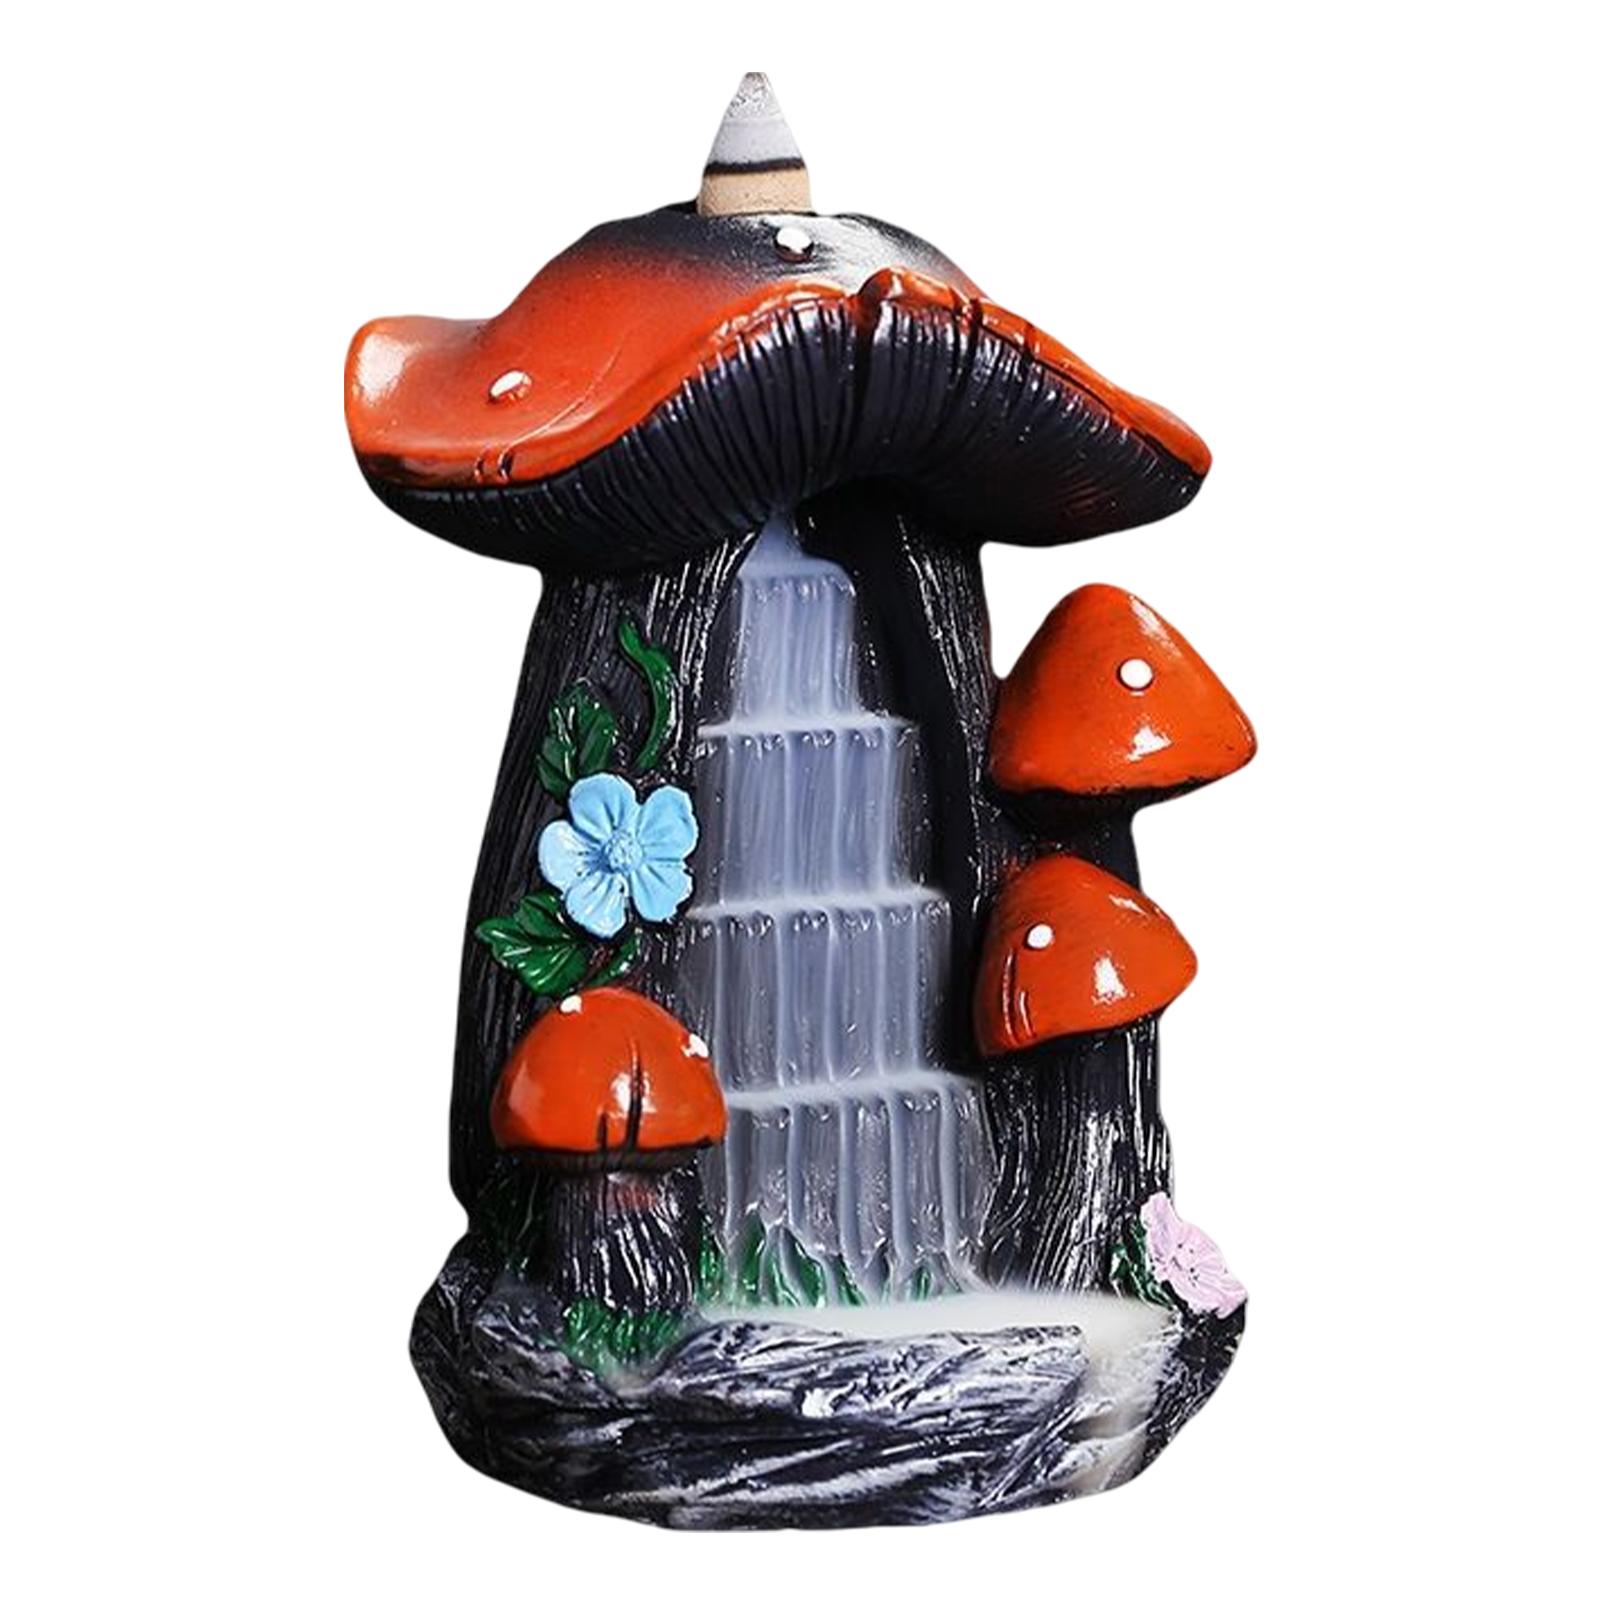 Waterfall Holder Home Decor Burner Stand Statue Backflow - image 1 of 6